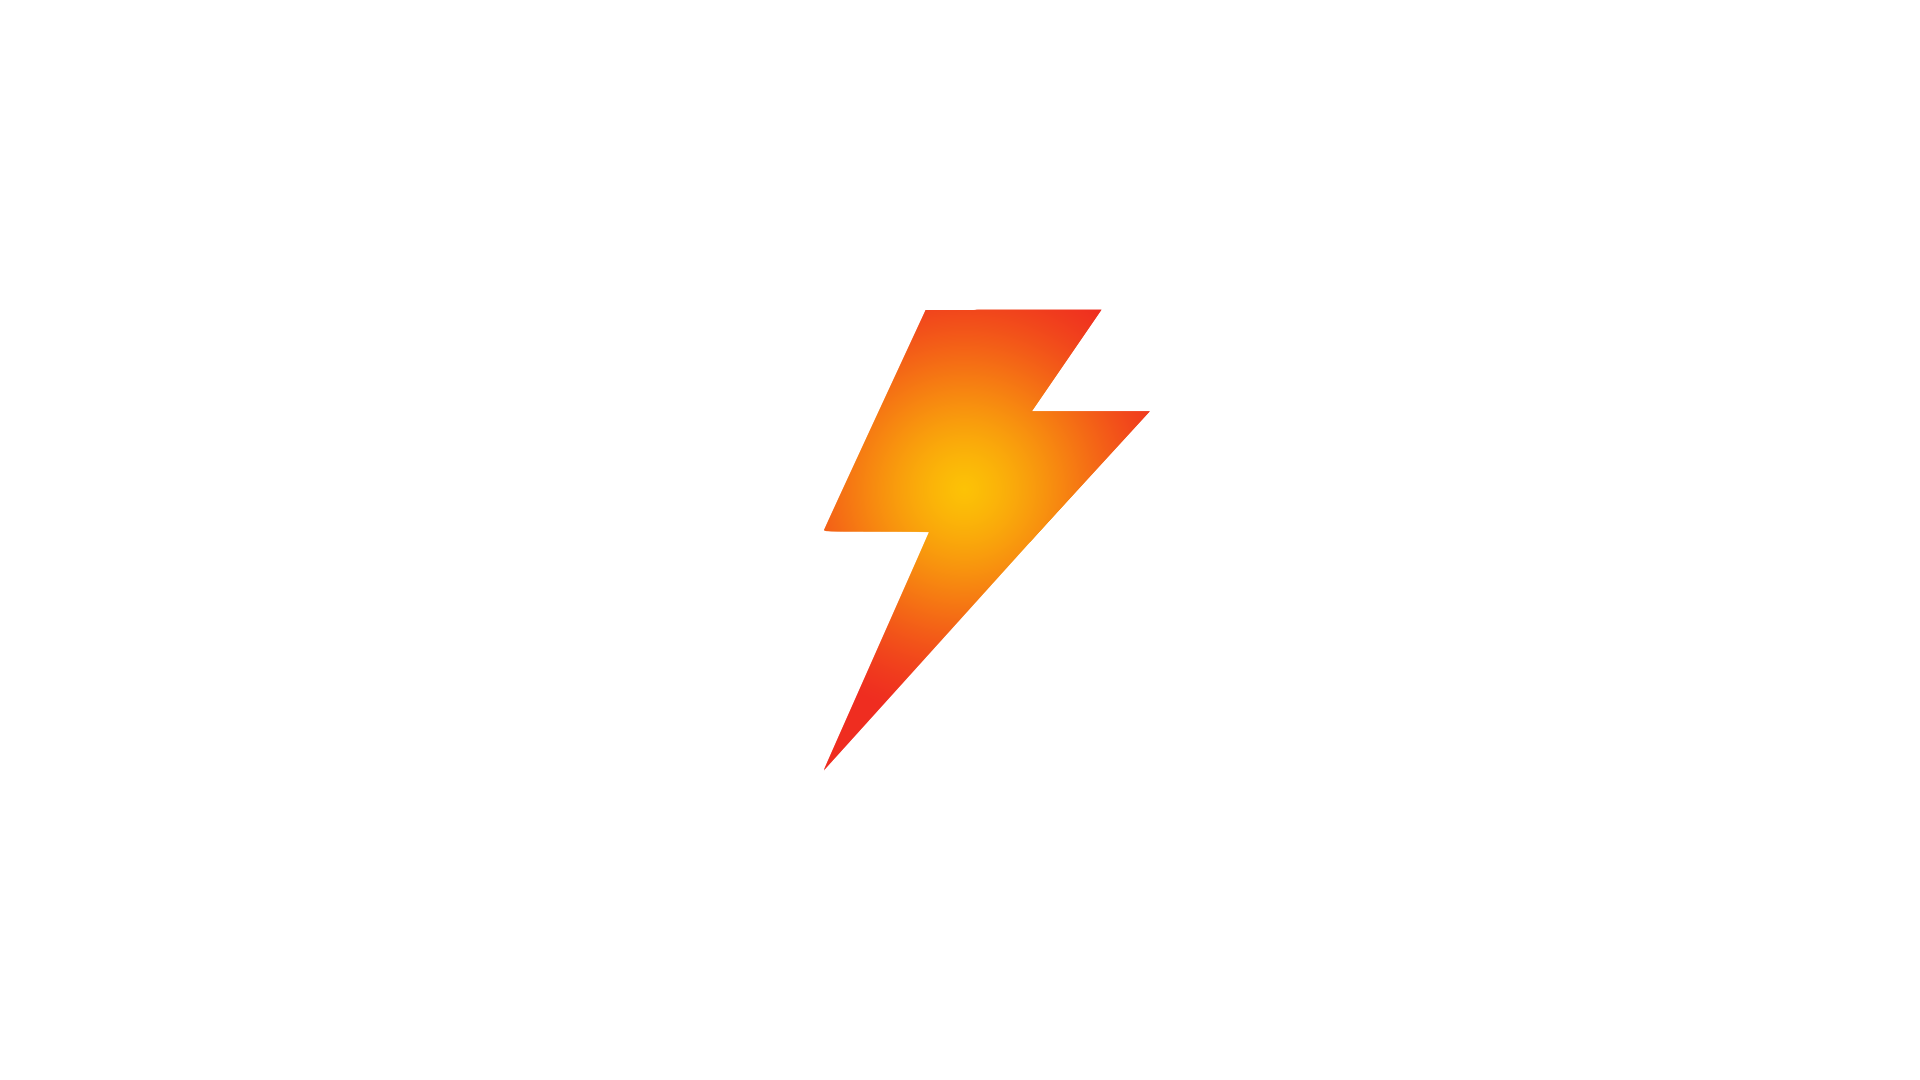 Pulze Controllers